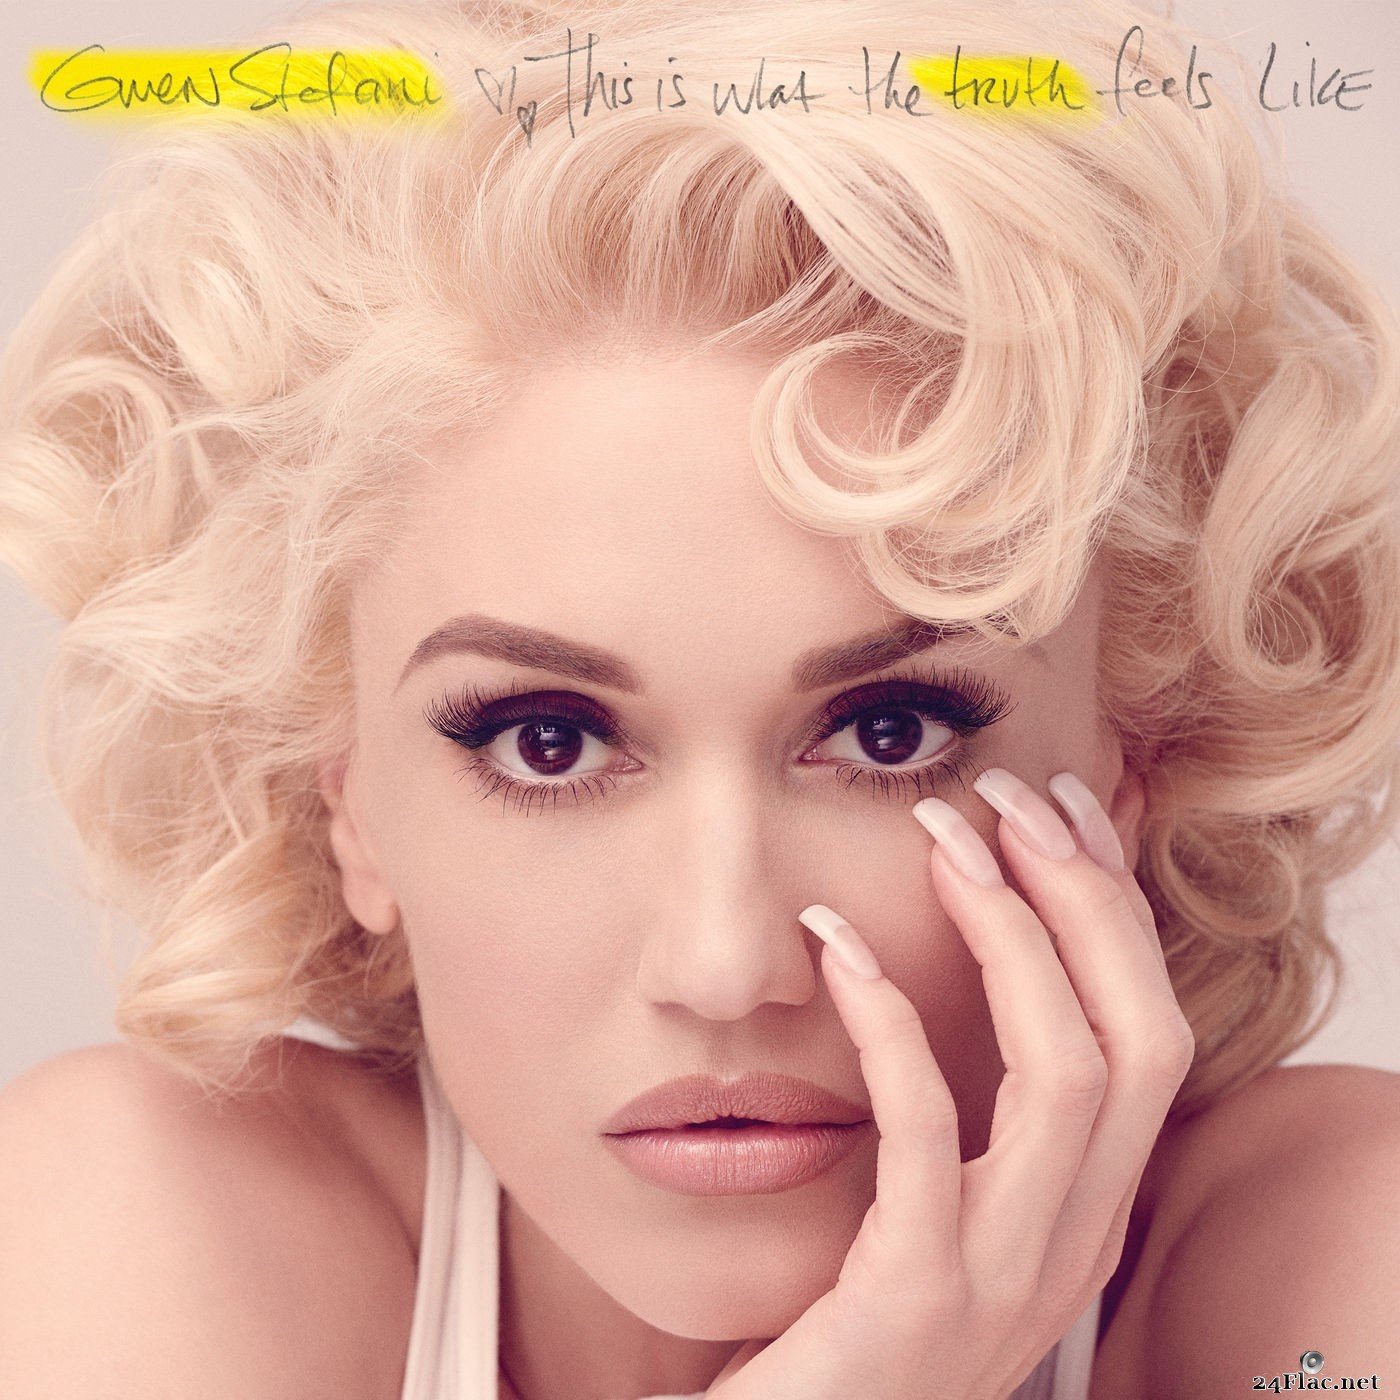 Gwen Stefani - This Is What the Truth Feels Like (Deluxe) (2016) Hi-Res